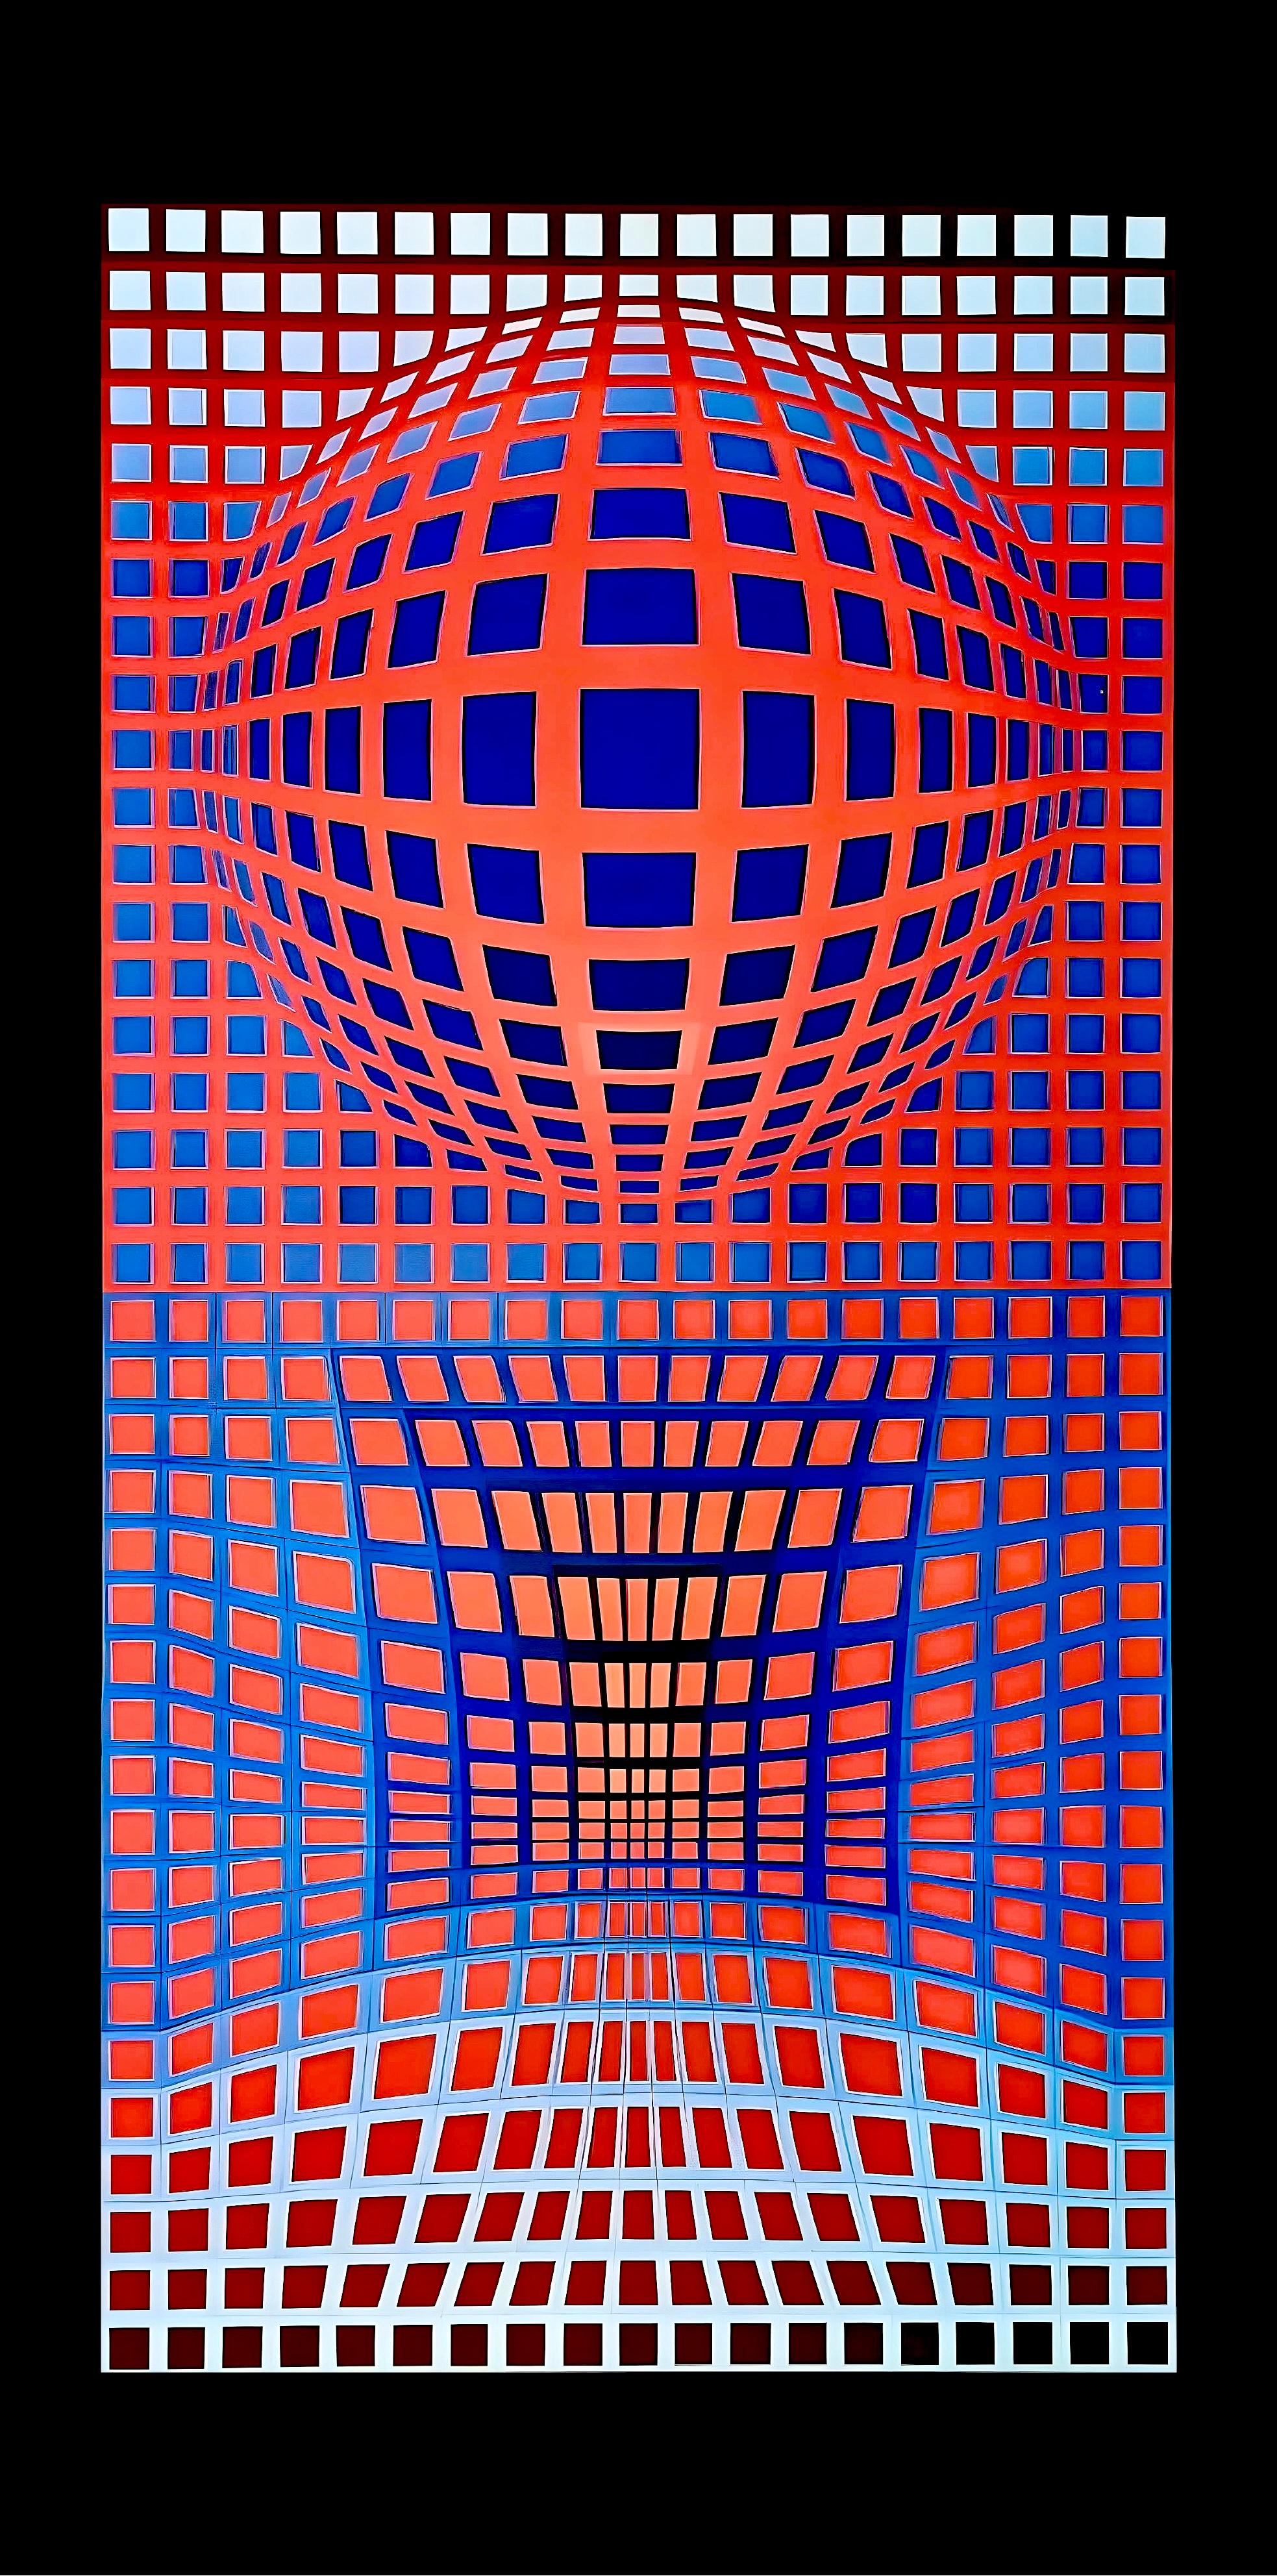 Vasarely, VP - RB (after)